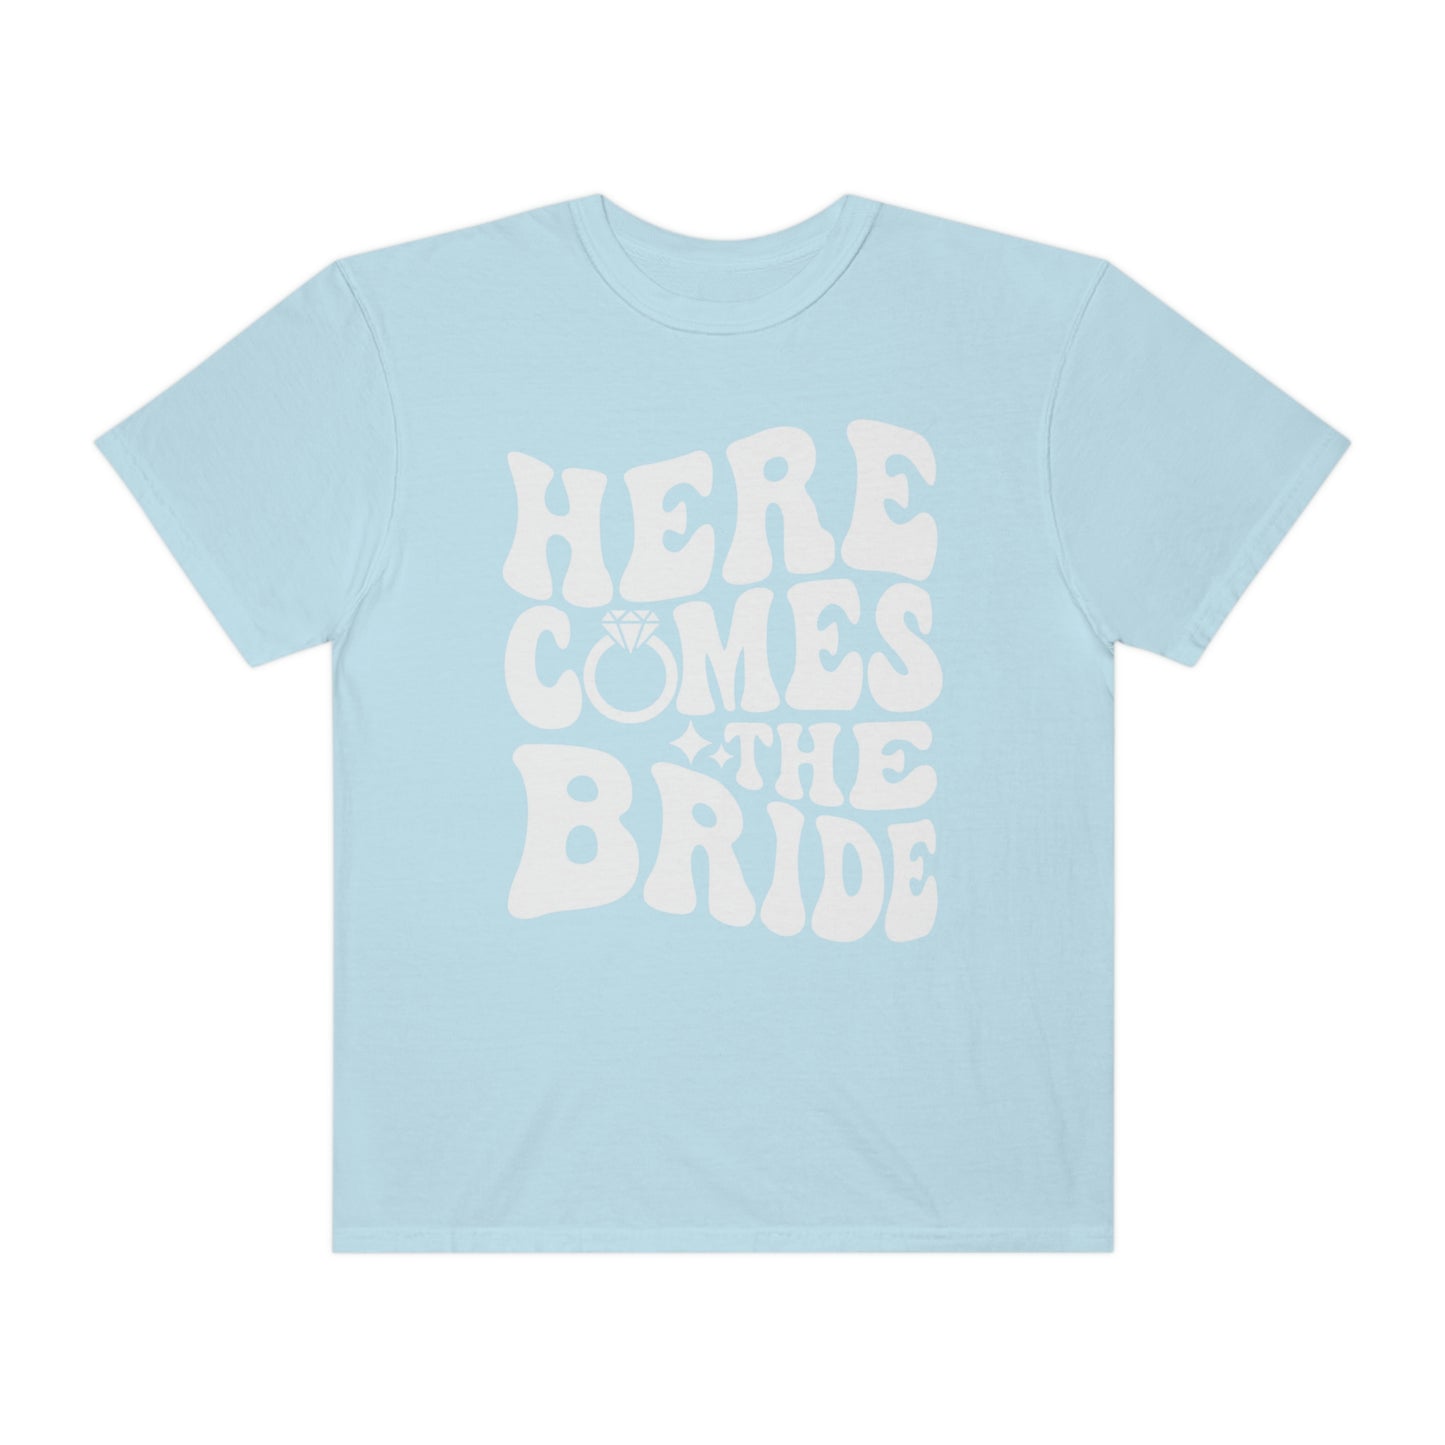 Here Comes The Bride Shirt